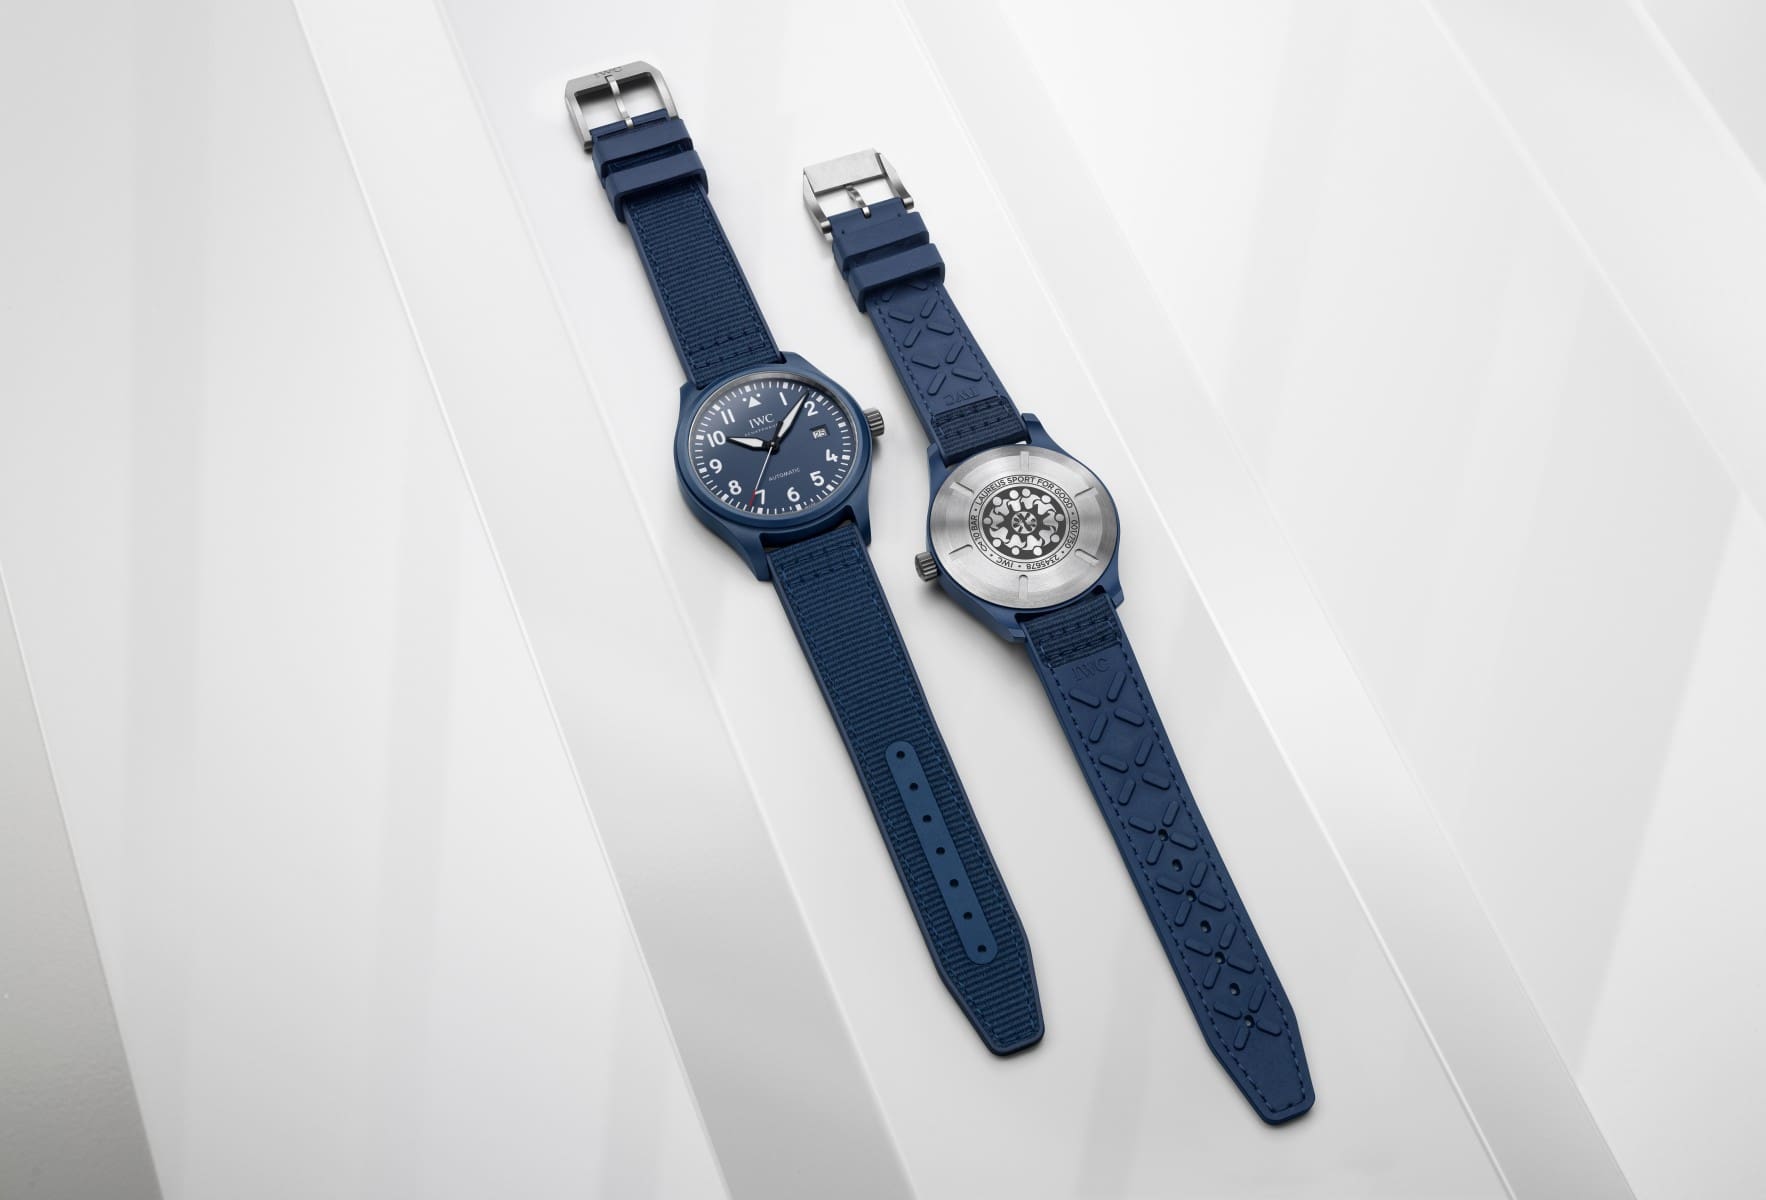 INTRODUCING: IWC’s true blue special edition supports the Laureus Foundation